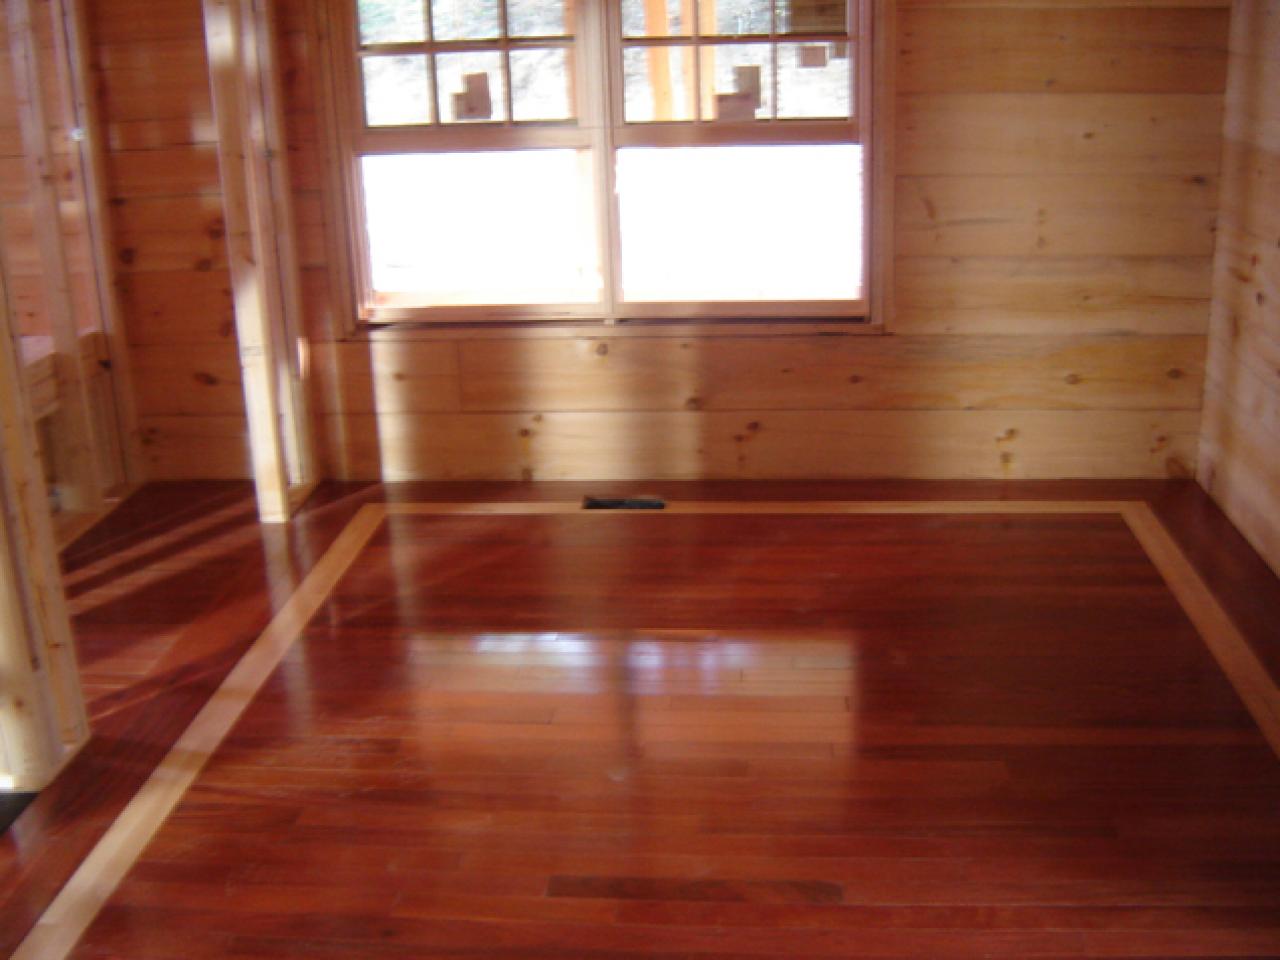 How To Install Hardwood Flooring, Learn How To Install Hardwood Floors